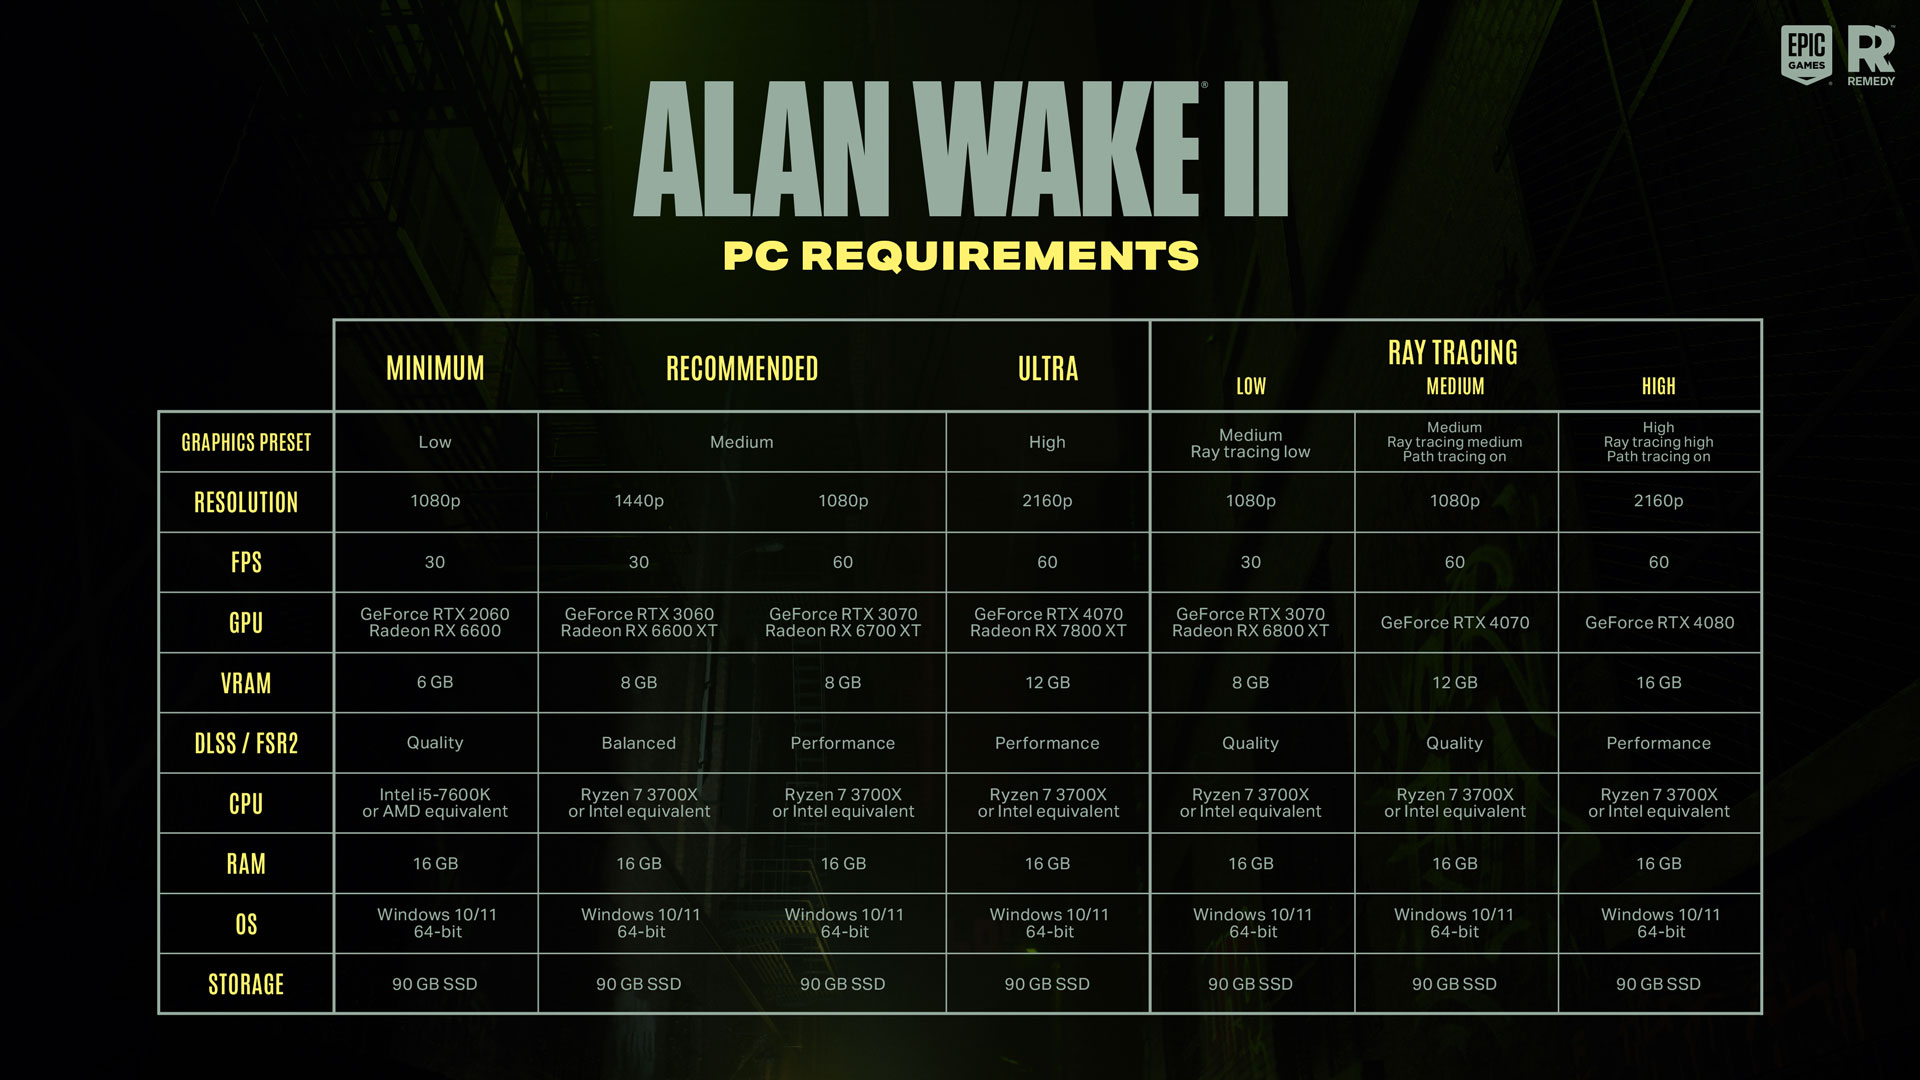 The system requirements for Alan Wake 2.